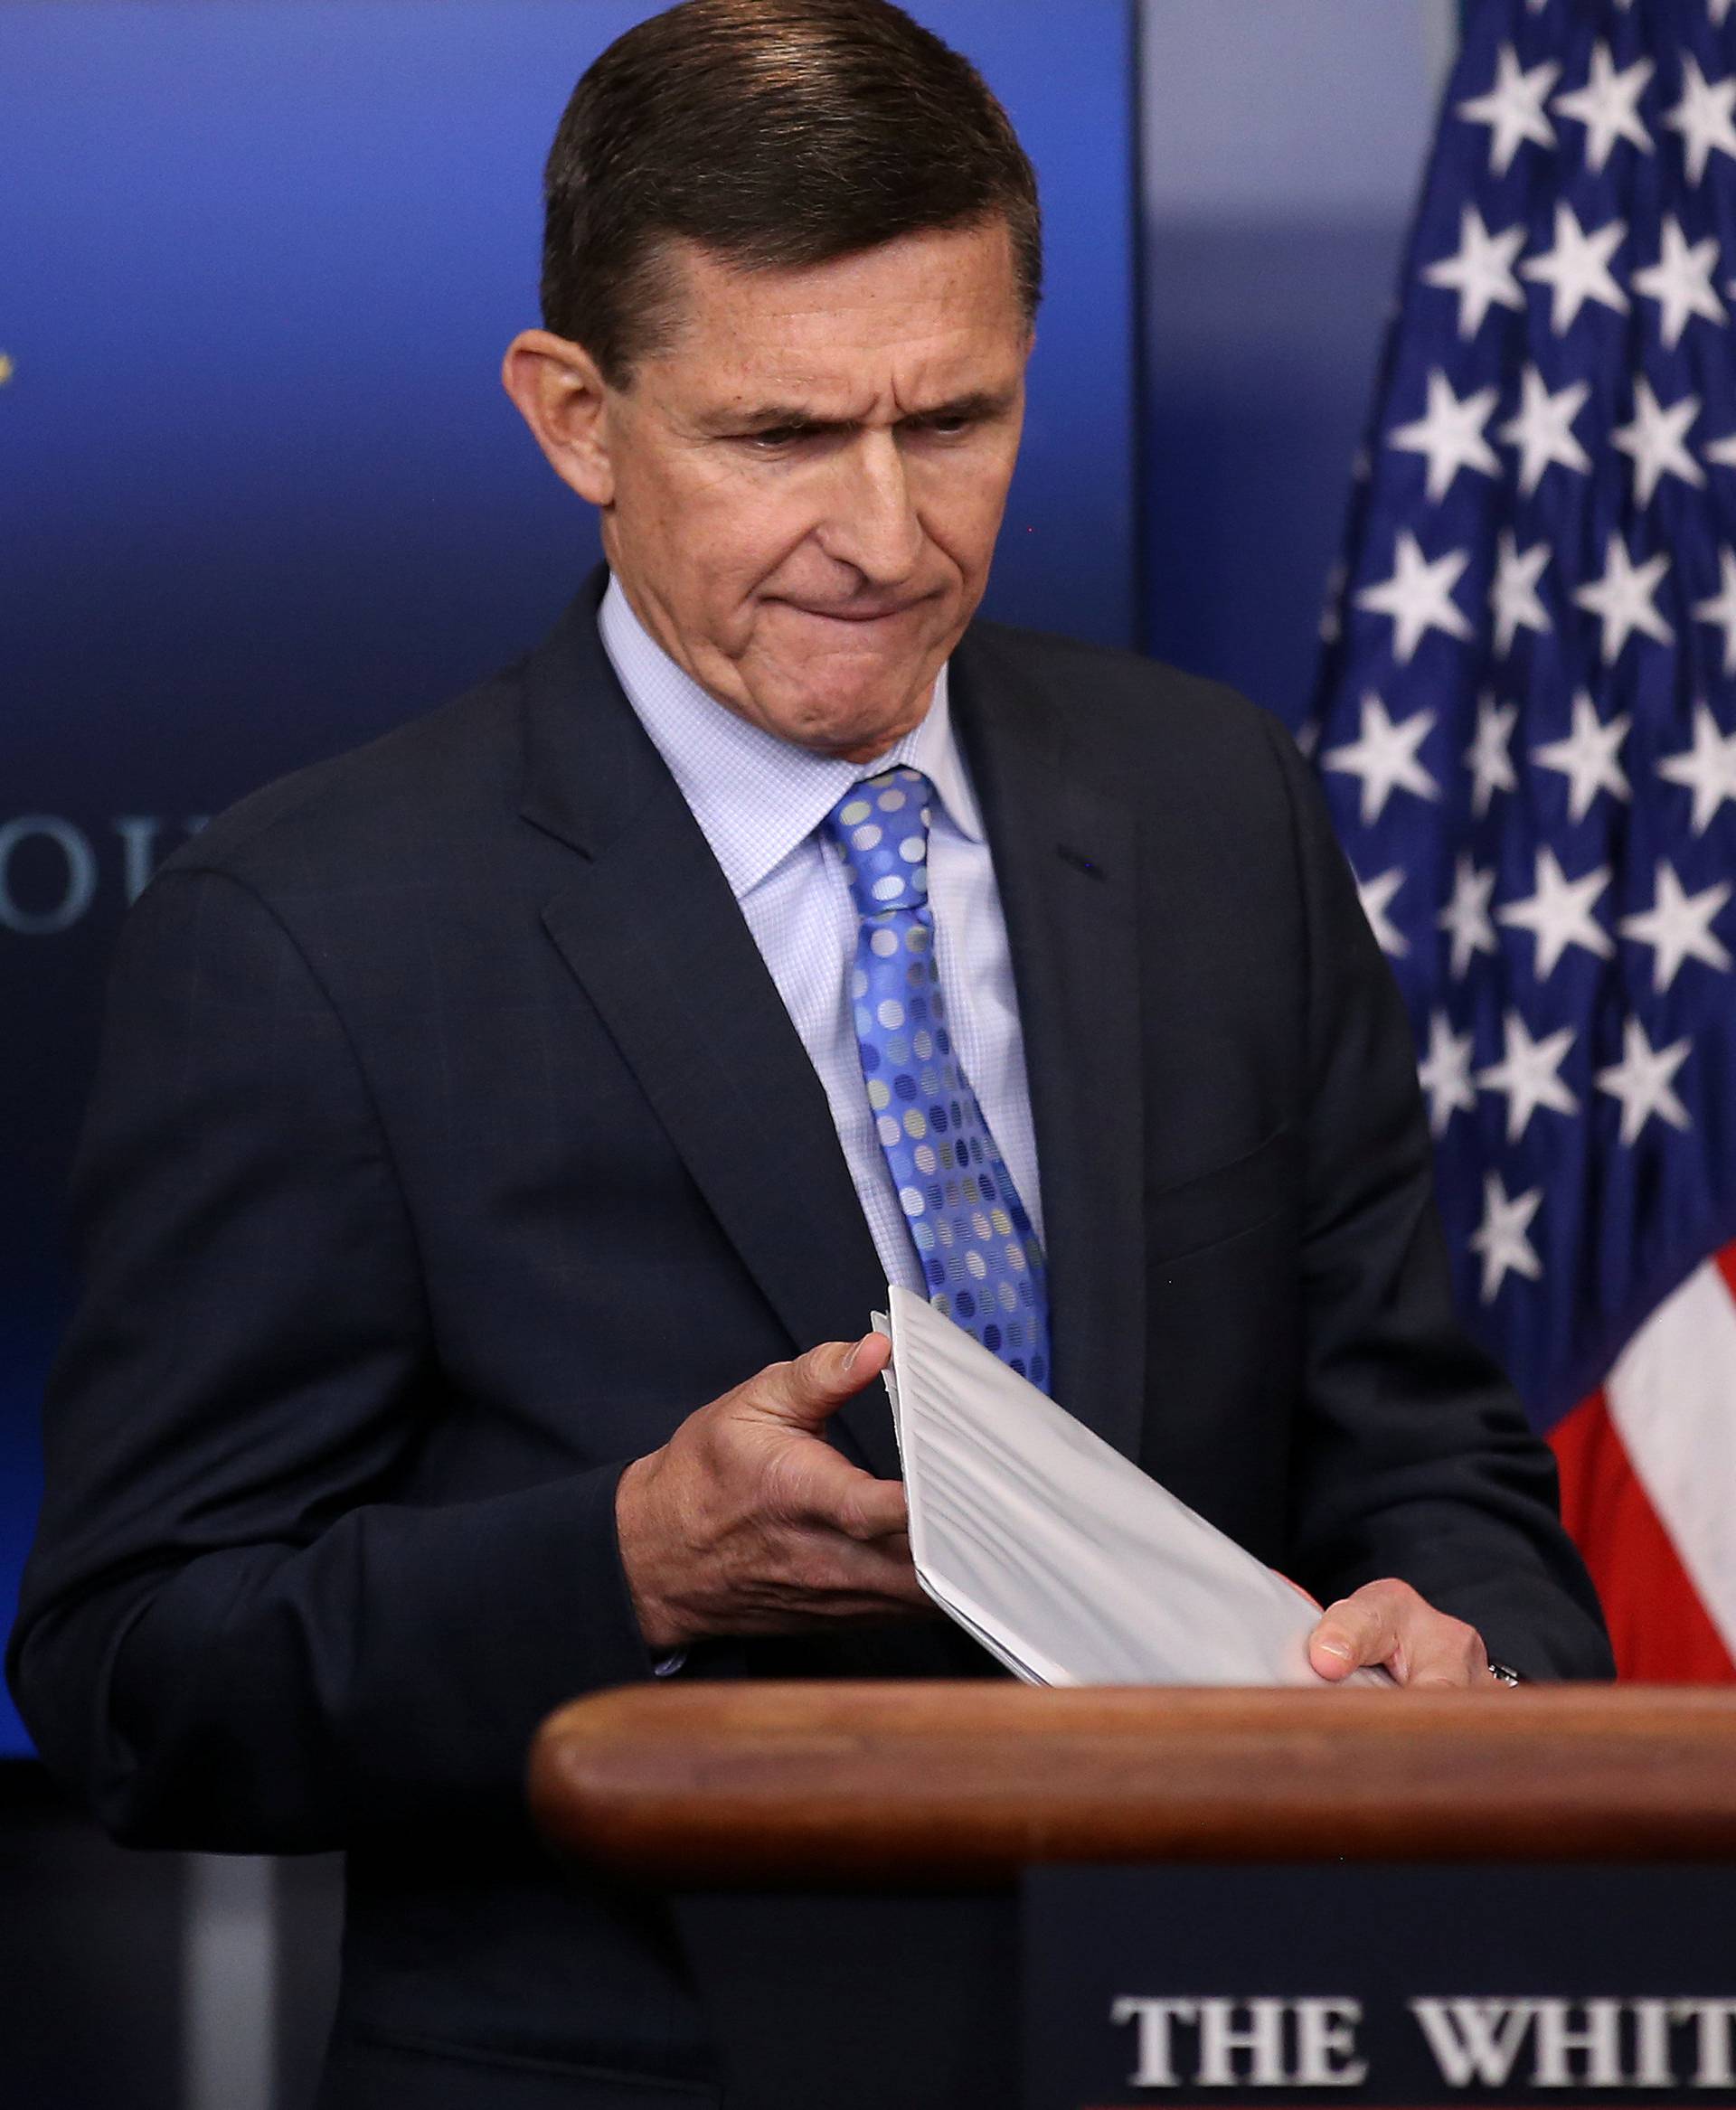 National security adviser General Michael Flynn (L) arrives to deliver a statement next to Press Secretary Sean Spicer during the daily briefing at the White House in Washington U.S.